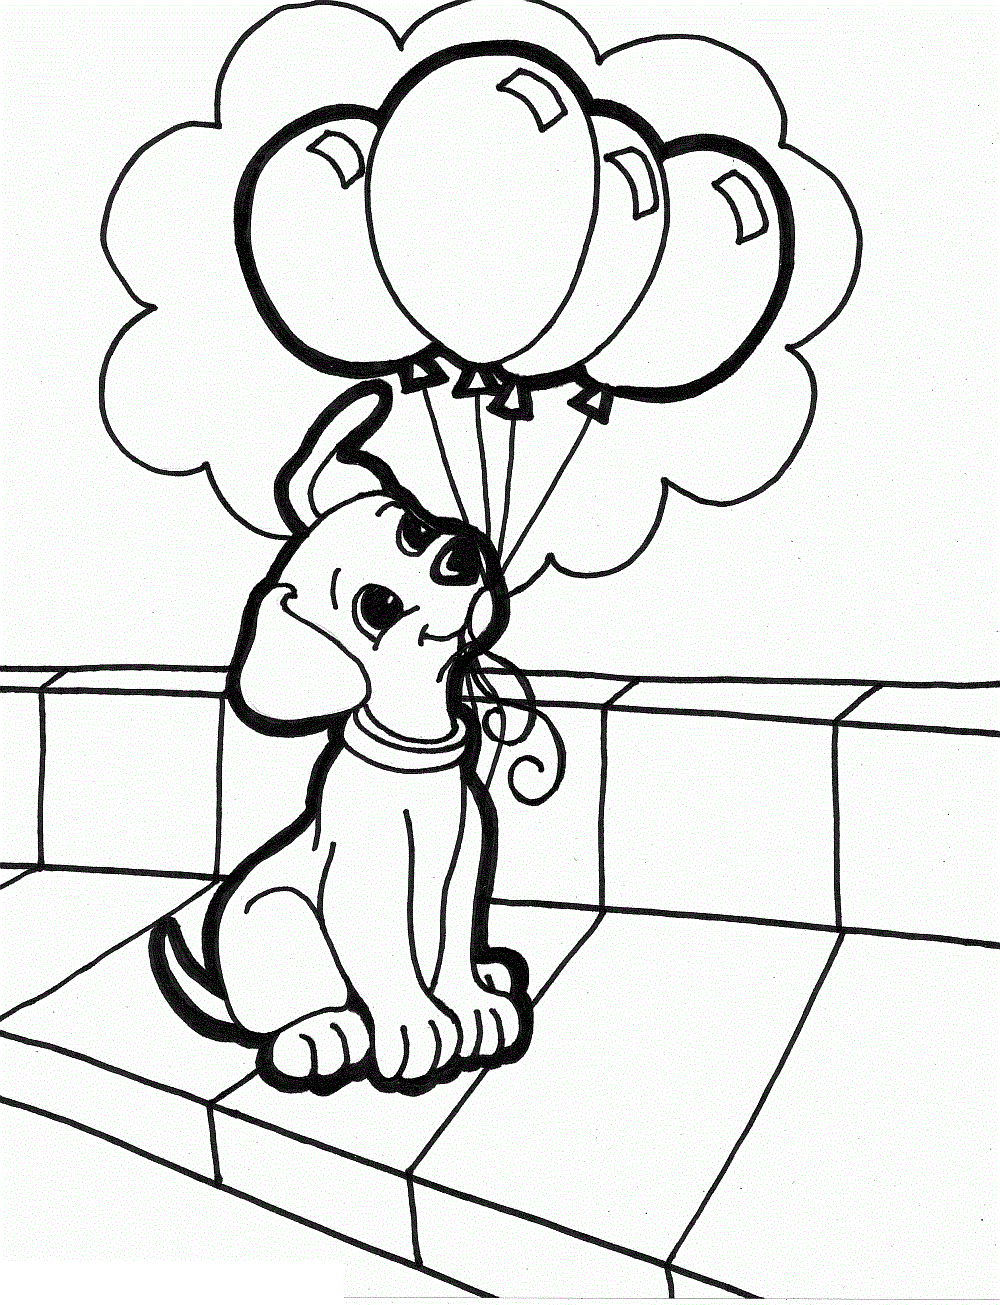 Dog With Balloon